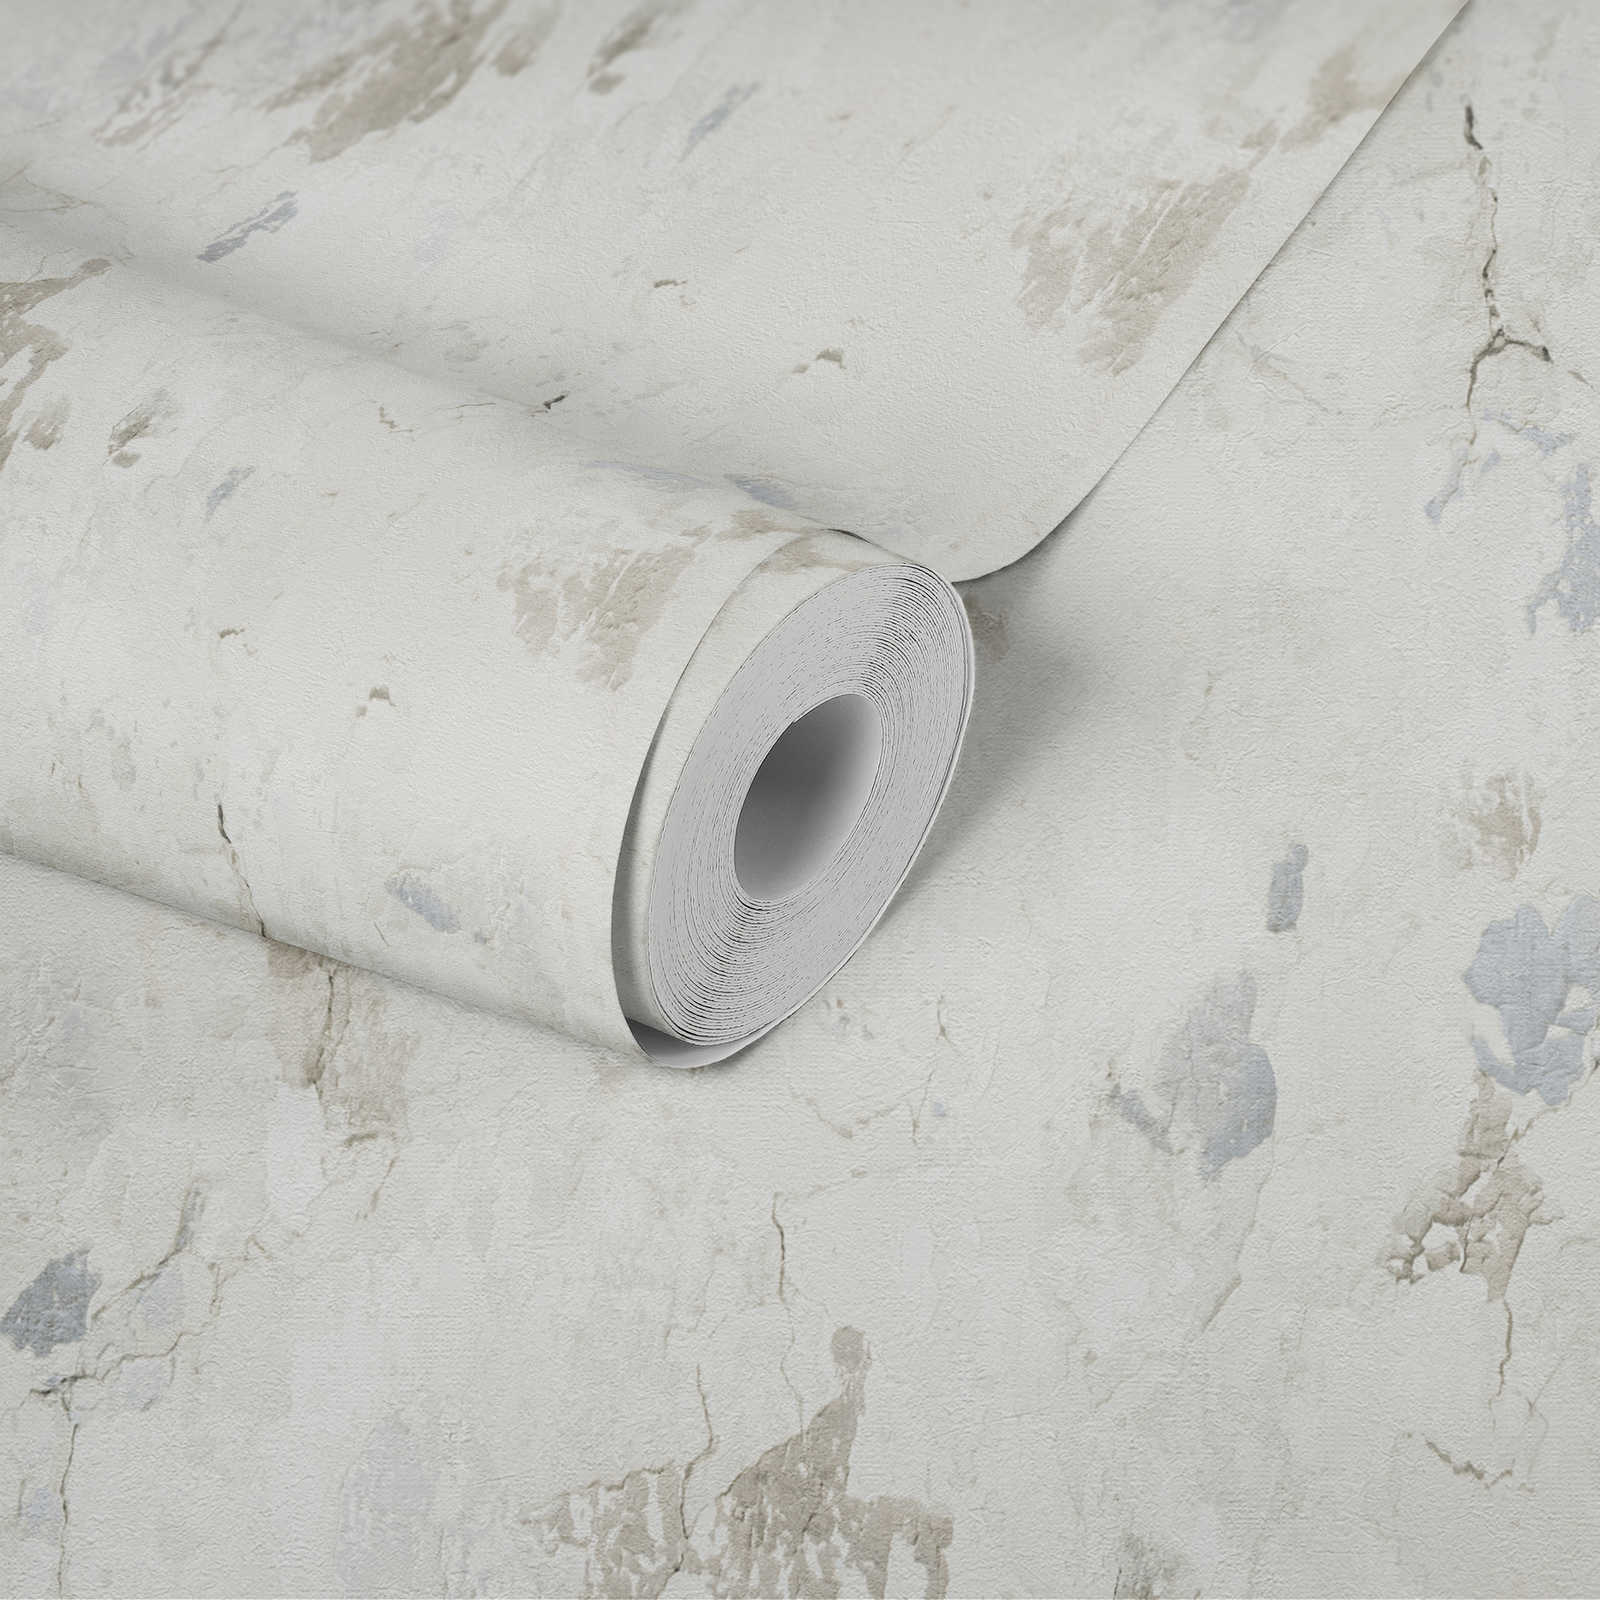             Wallpaper with plaster look in modern industrial style - cream, grey
        